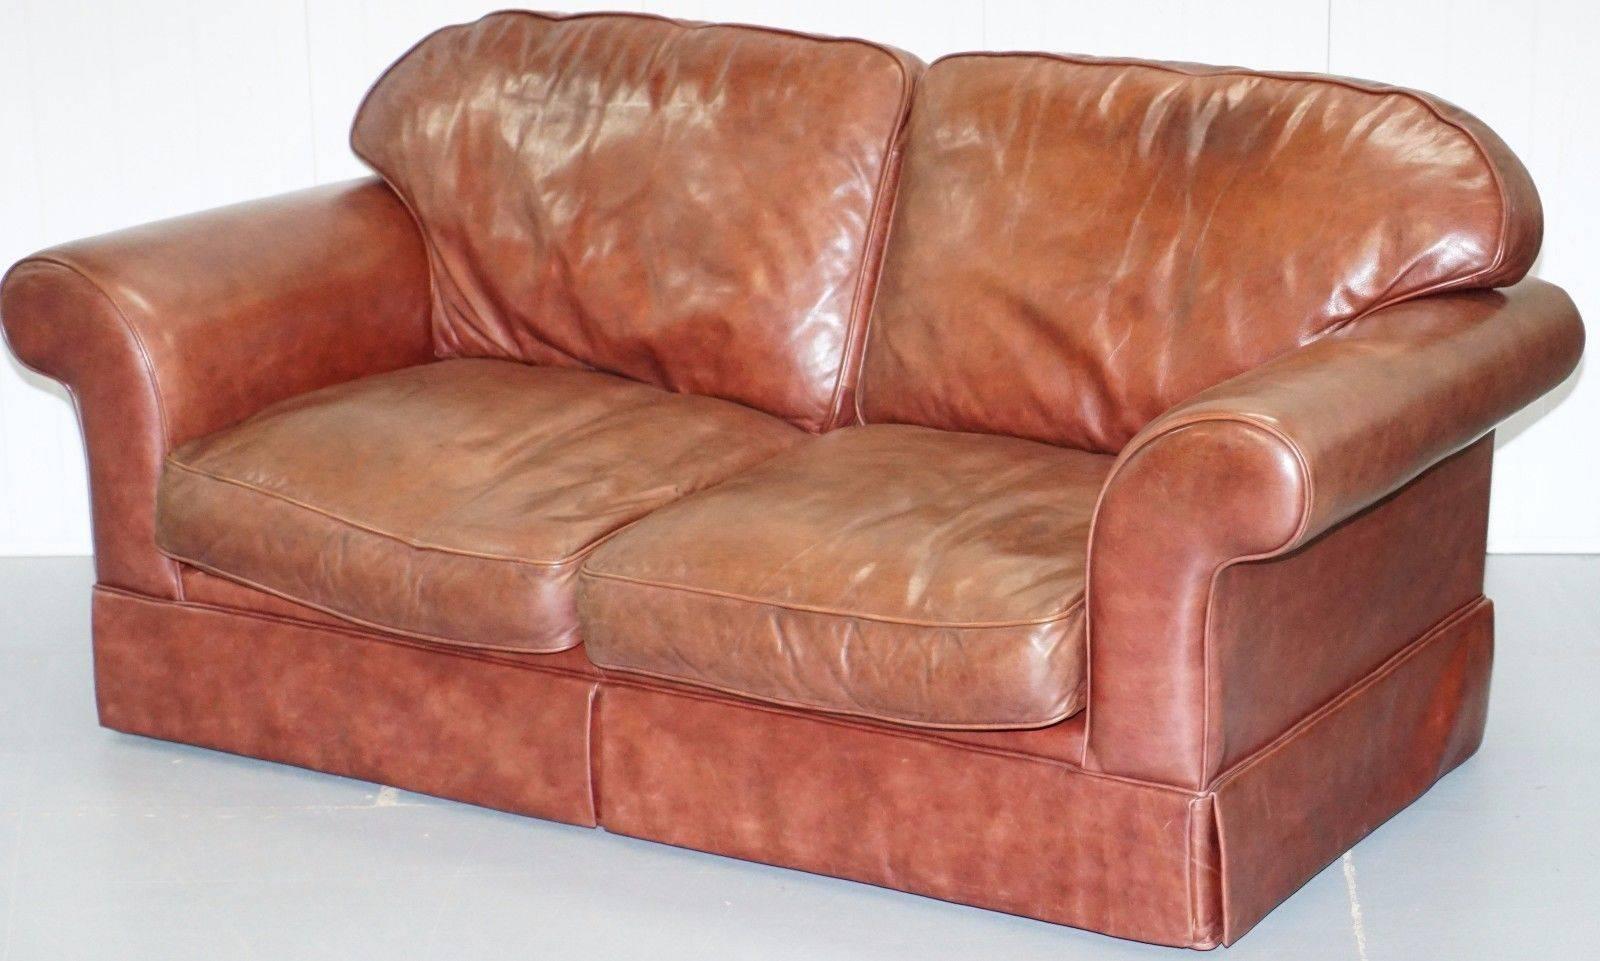 1 of 2 Laura Ashley Heritage Brown Leather Large 2.5-Seat Sofas 1